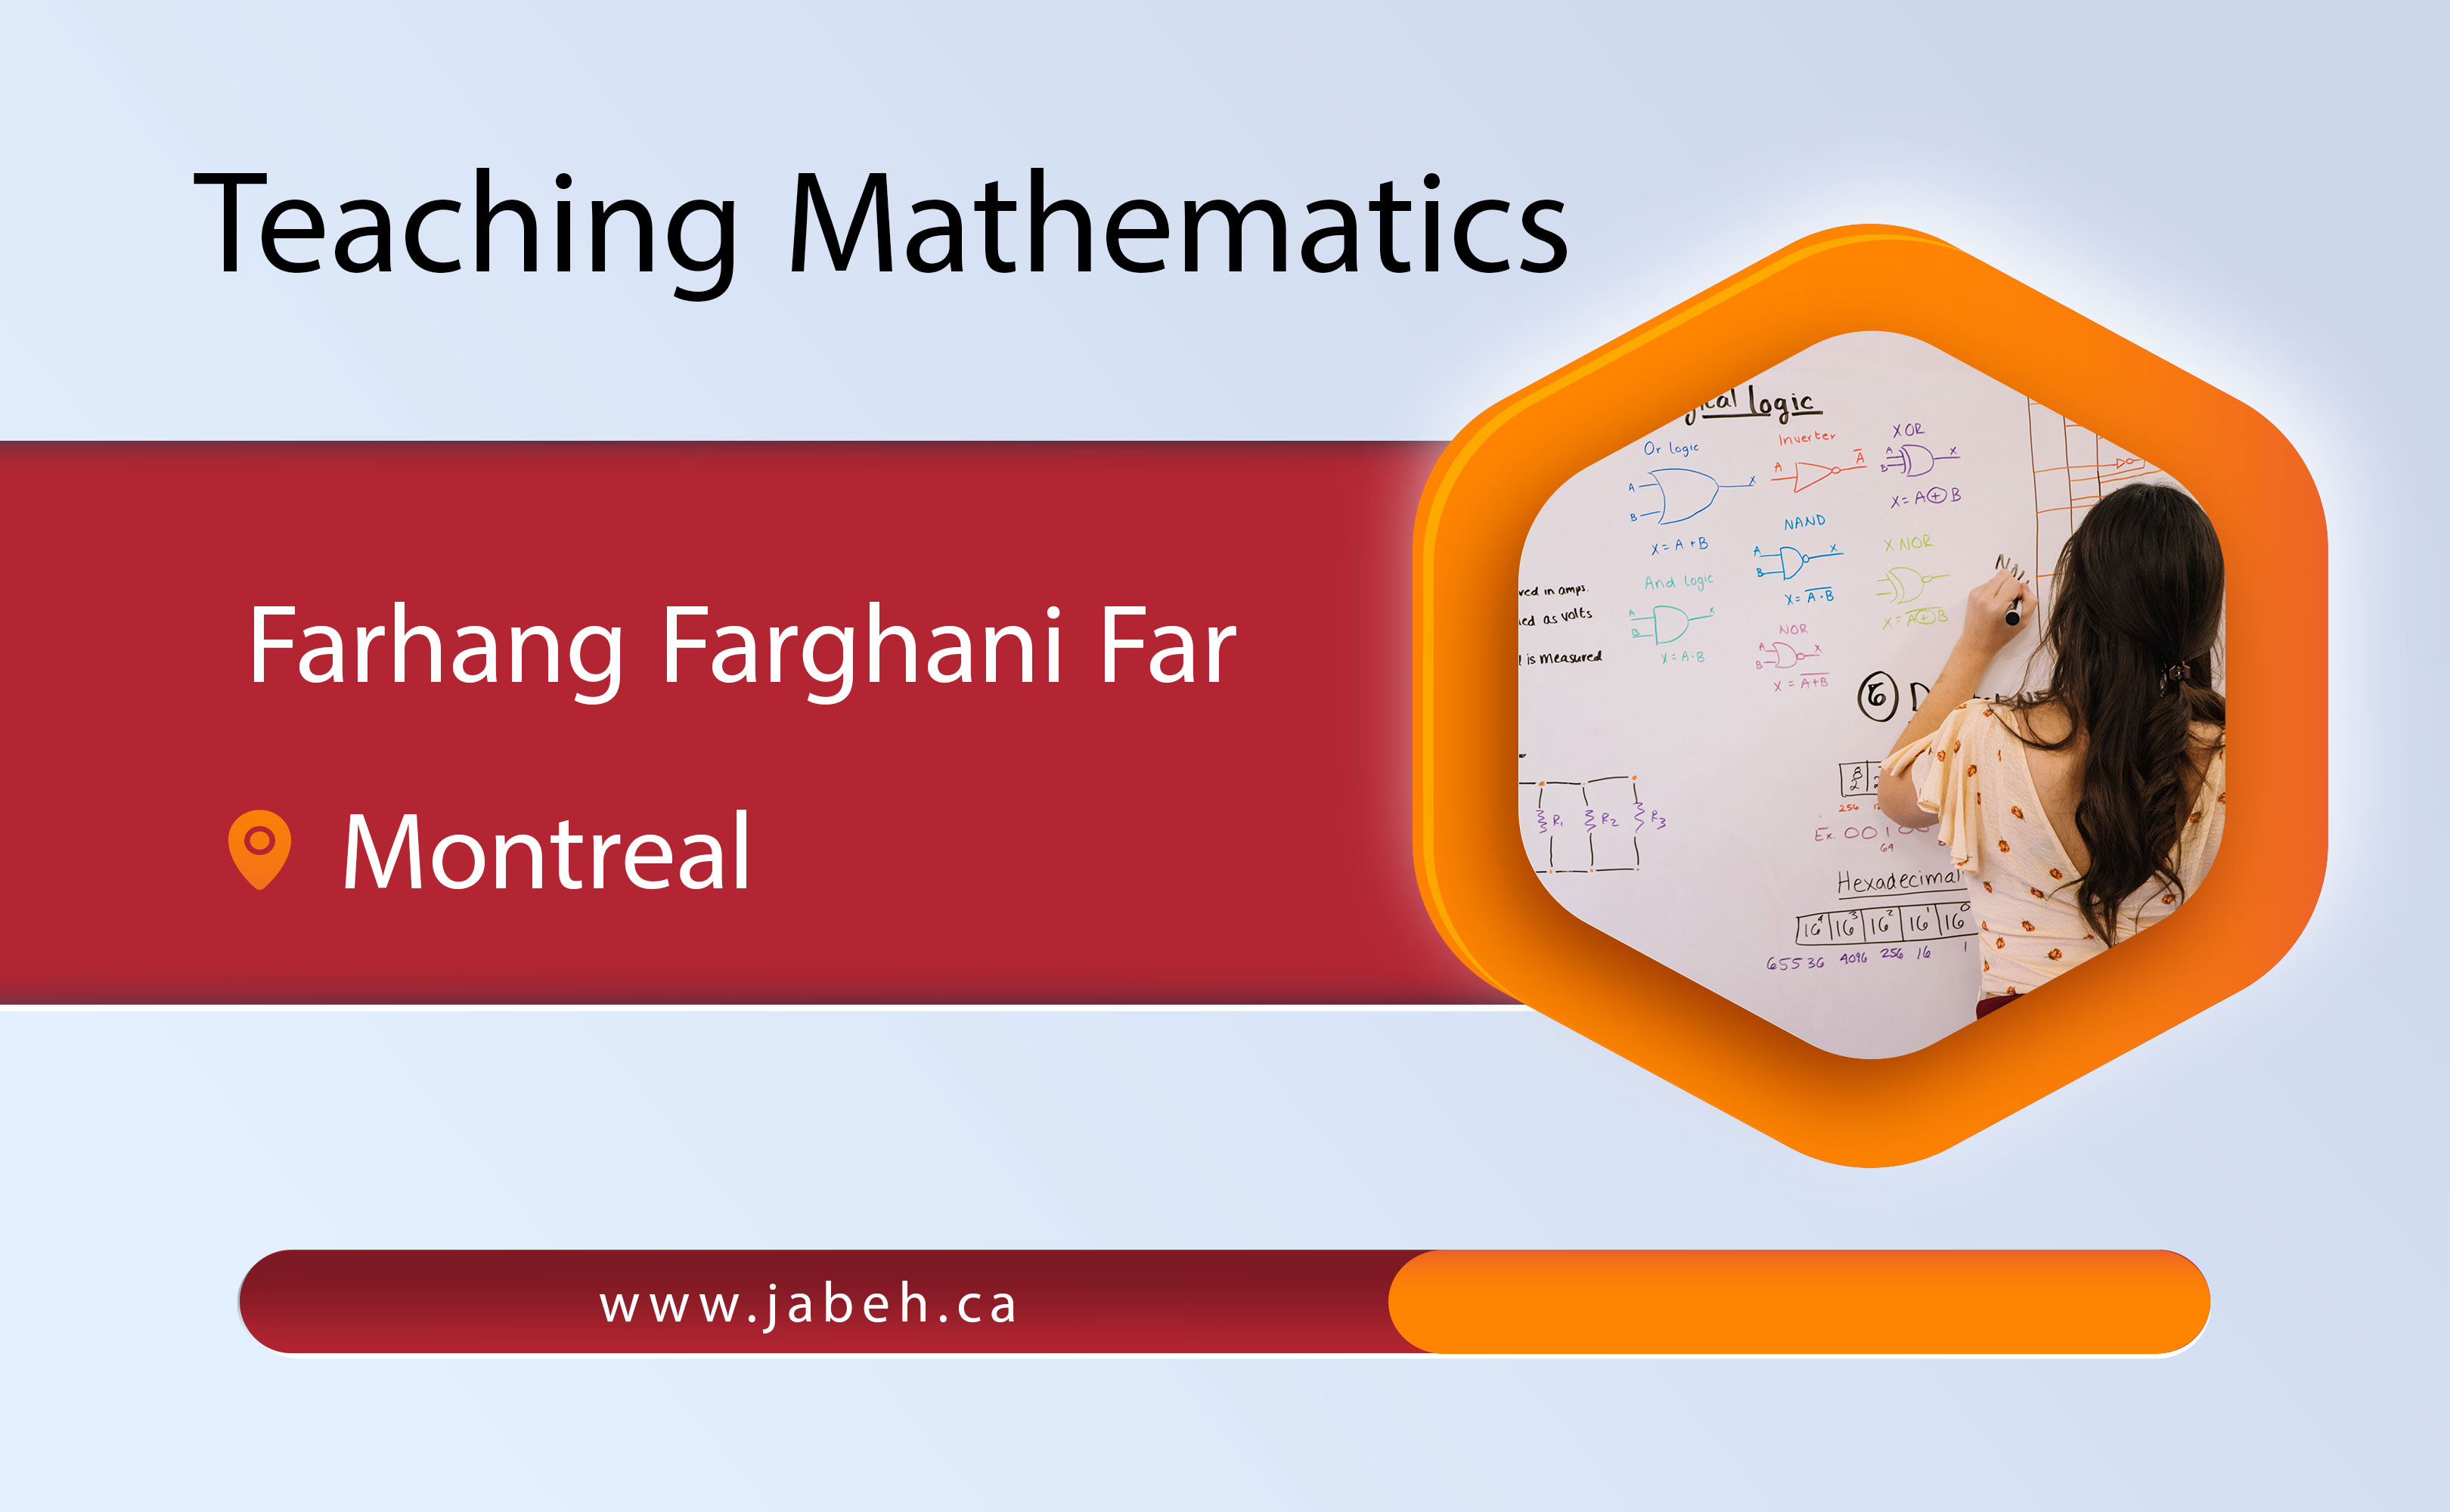 Mathematical teaching of Farghani Far culture in Montreal